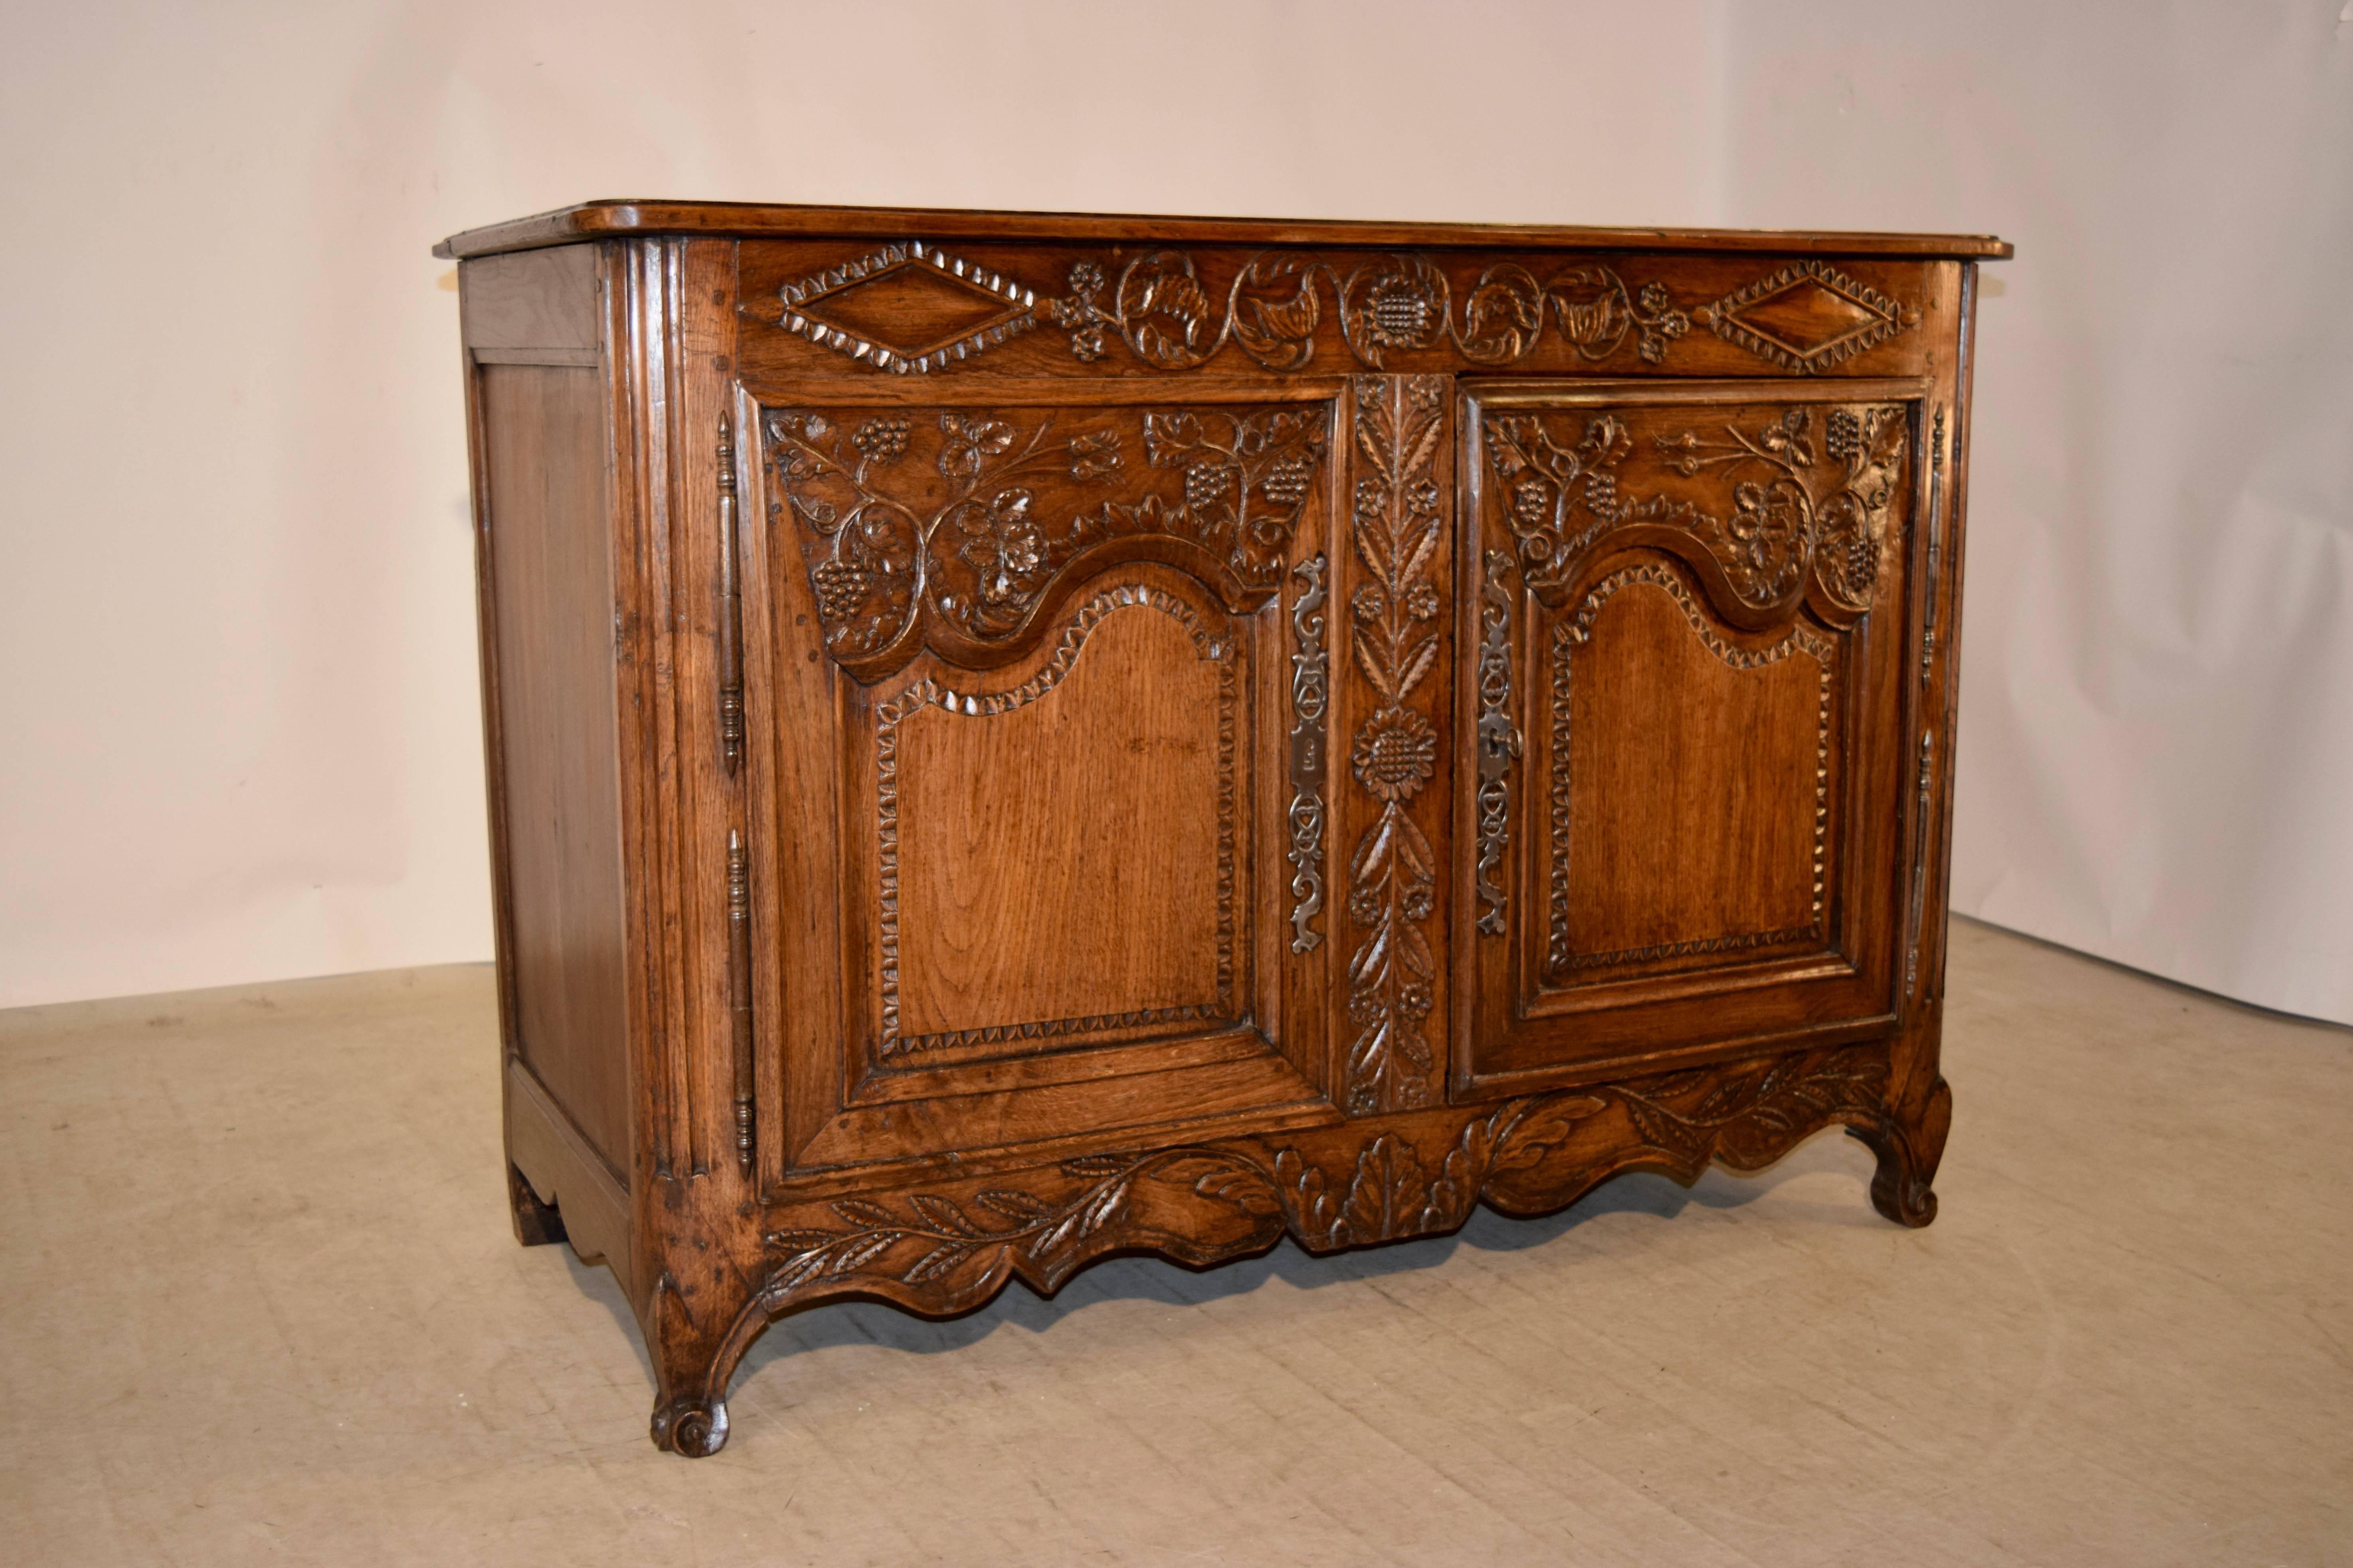 18th century French buffet made from oak. The top is banded and has a beveled edge, following down to paneled sides and a hand-carved cornice over two raised paneled and carved decorated doors which open to reveal shelving. The skirt is also